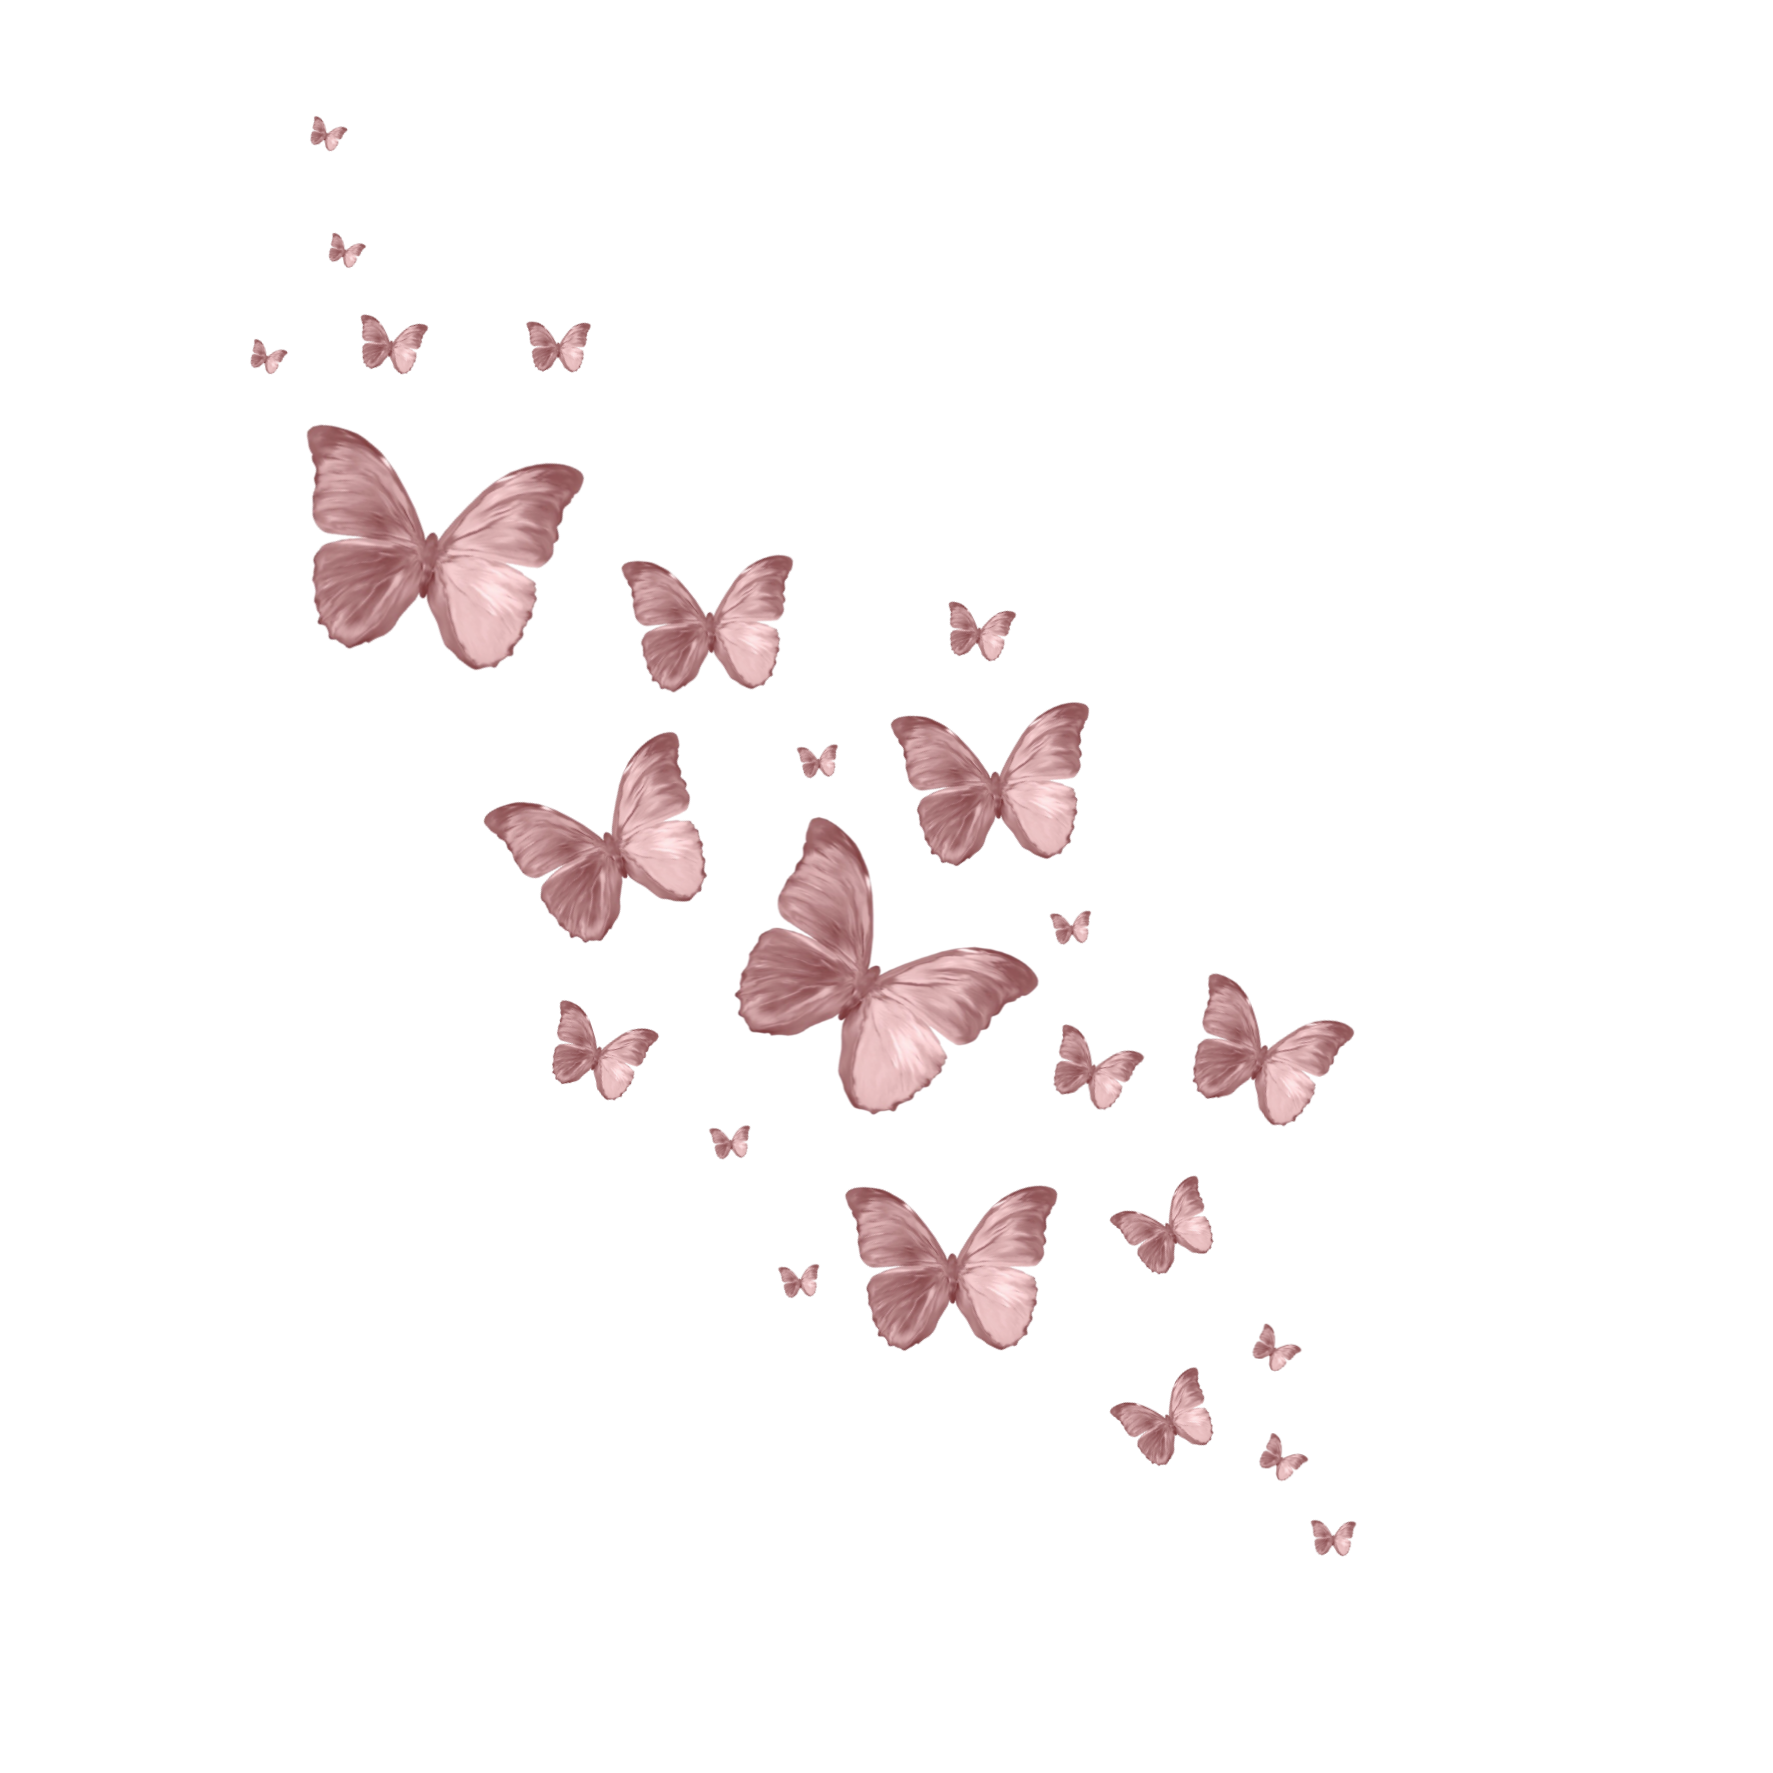 Iphone wallpaper tumblr aesthetic pink wallpaper iphone butterfly... 